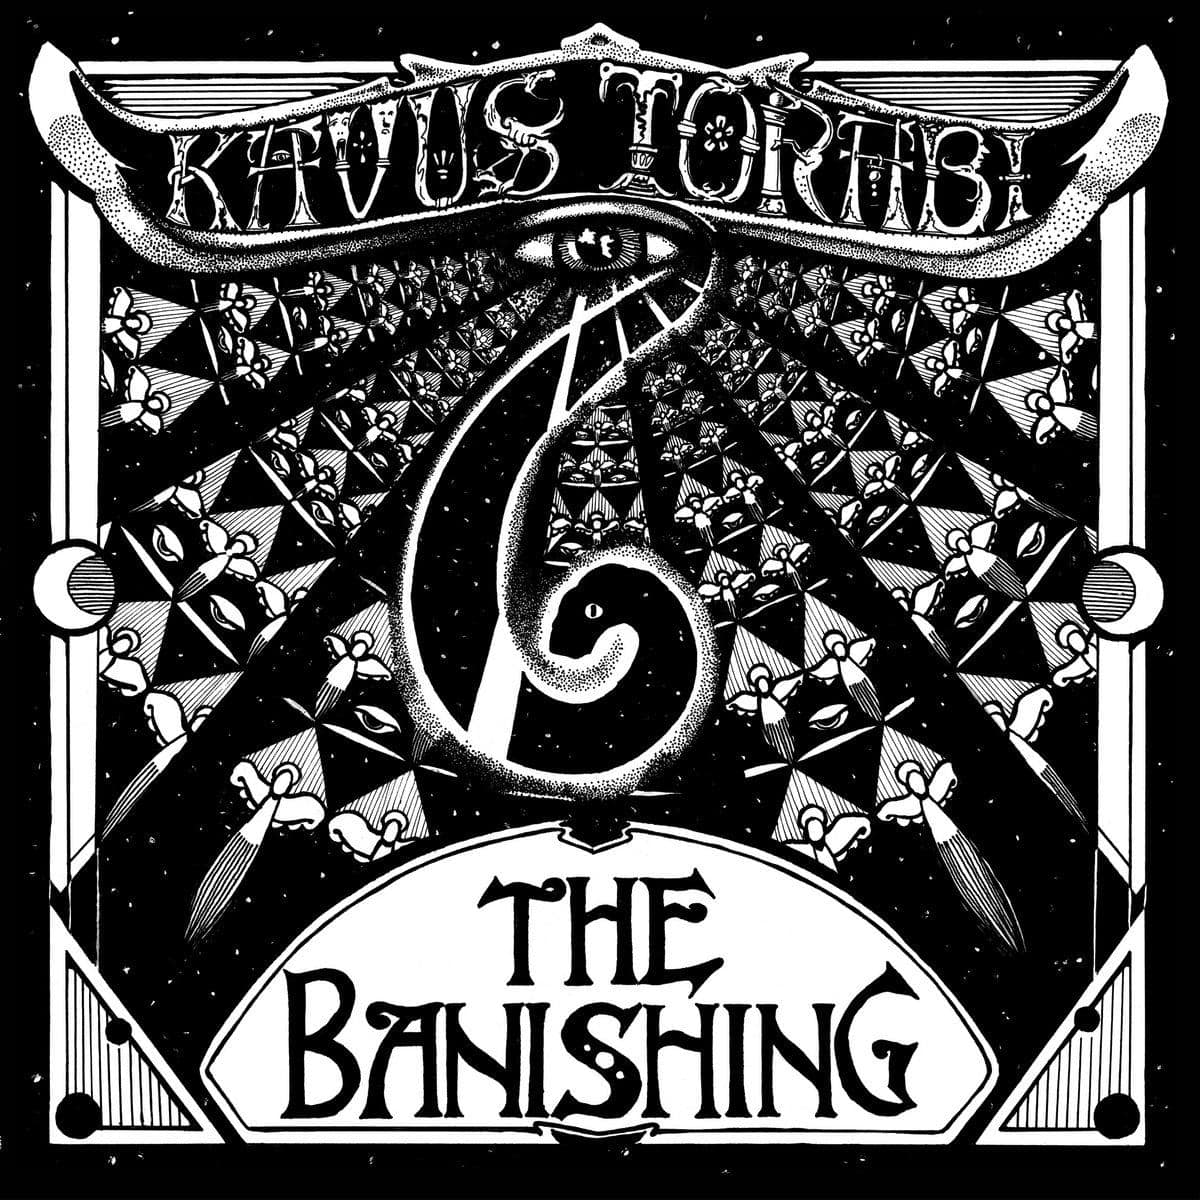 JUST IN! 'The Banishing' by Kavus Torabi Mystical psychedelic genre meddling from one of the key players in the UK psych/prog/experimental rock underground. @Knifeworld normanrecords.com/records/202859…